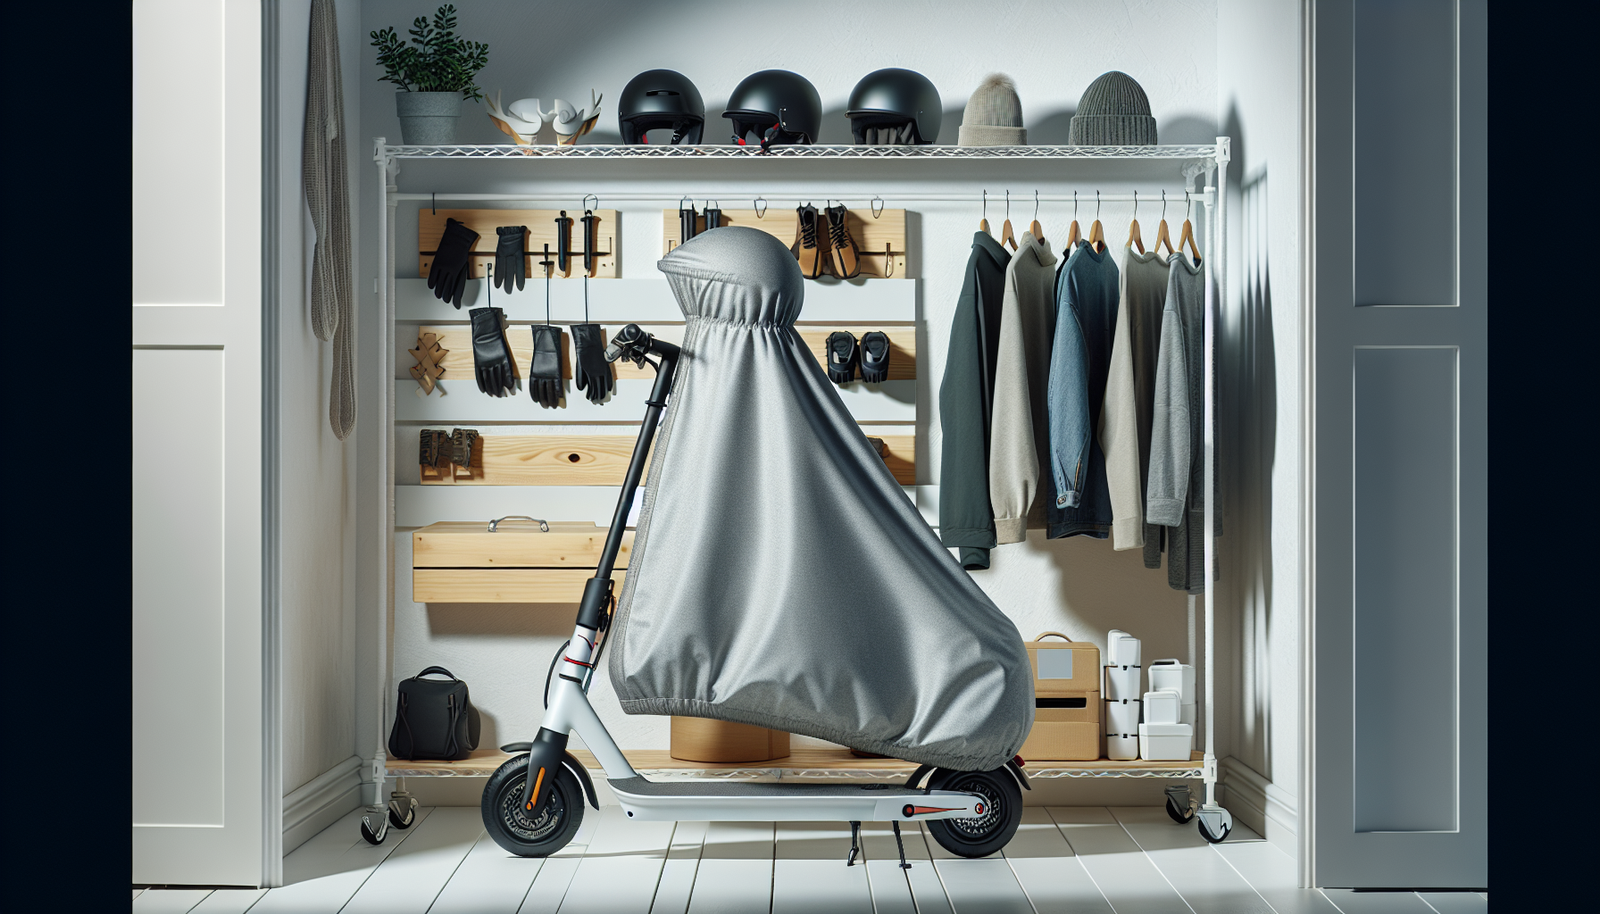 What Is The Proper Way To Store My Electric Scooter During The Winter Months?